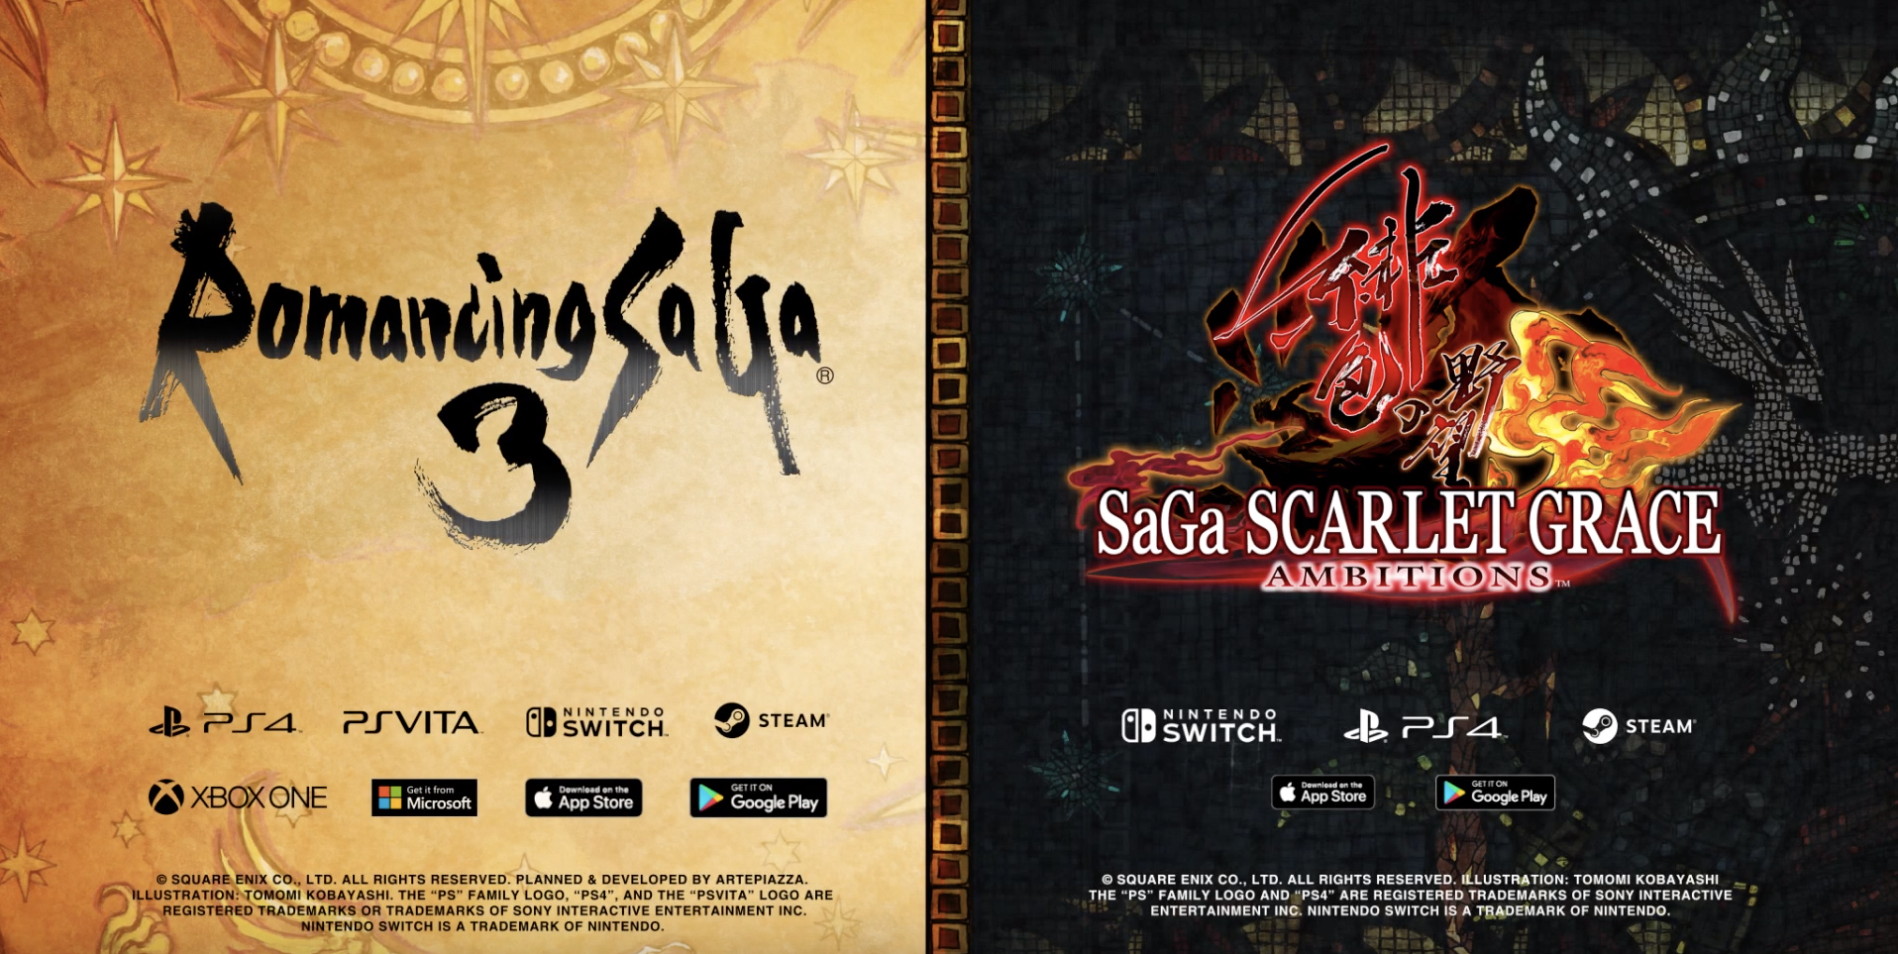 Romancing Saga 3 and SaGa SCARLET GRACE: AMBITIONS Announced for Nintendo Switch